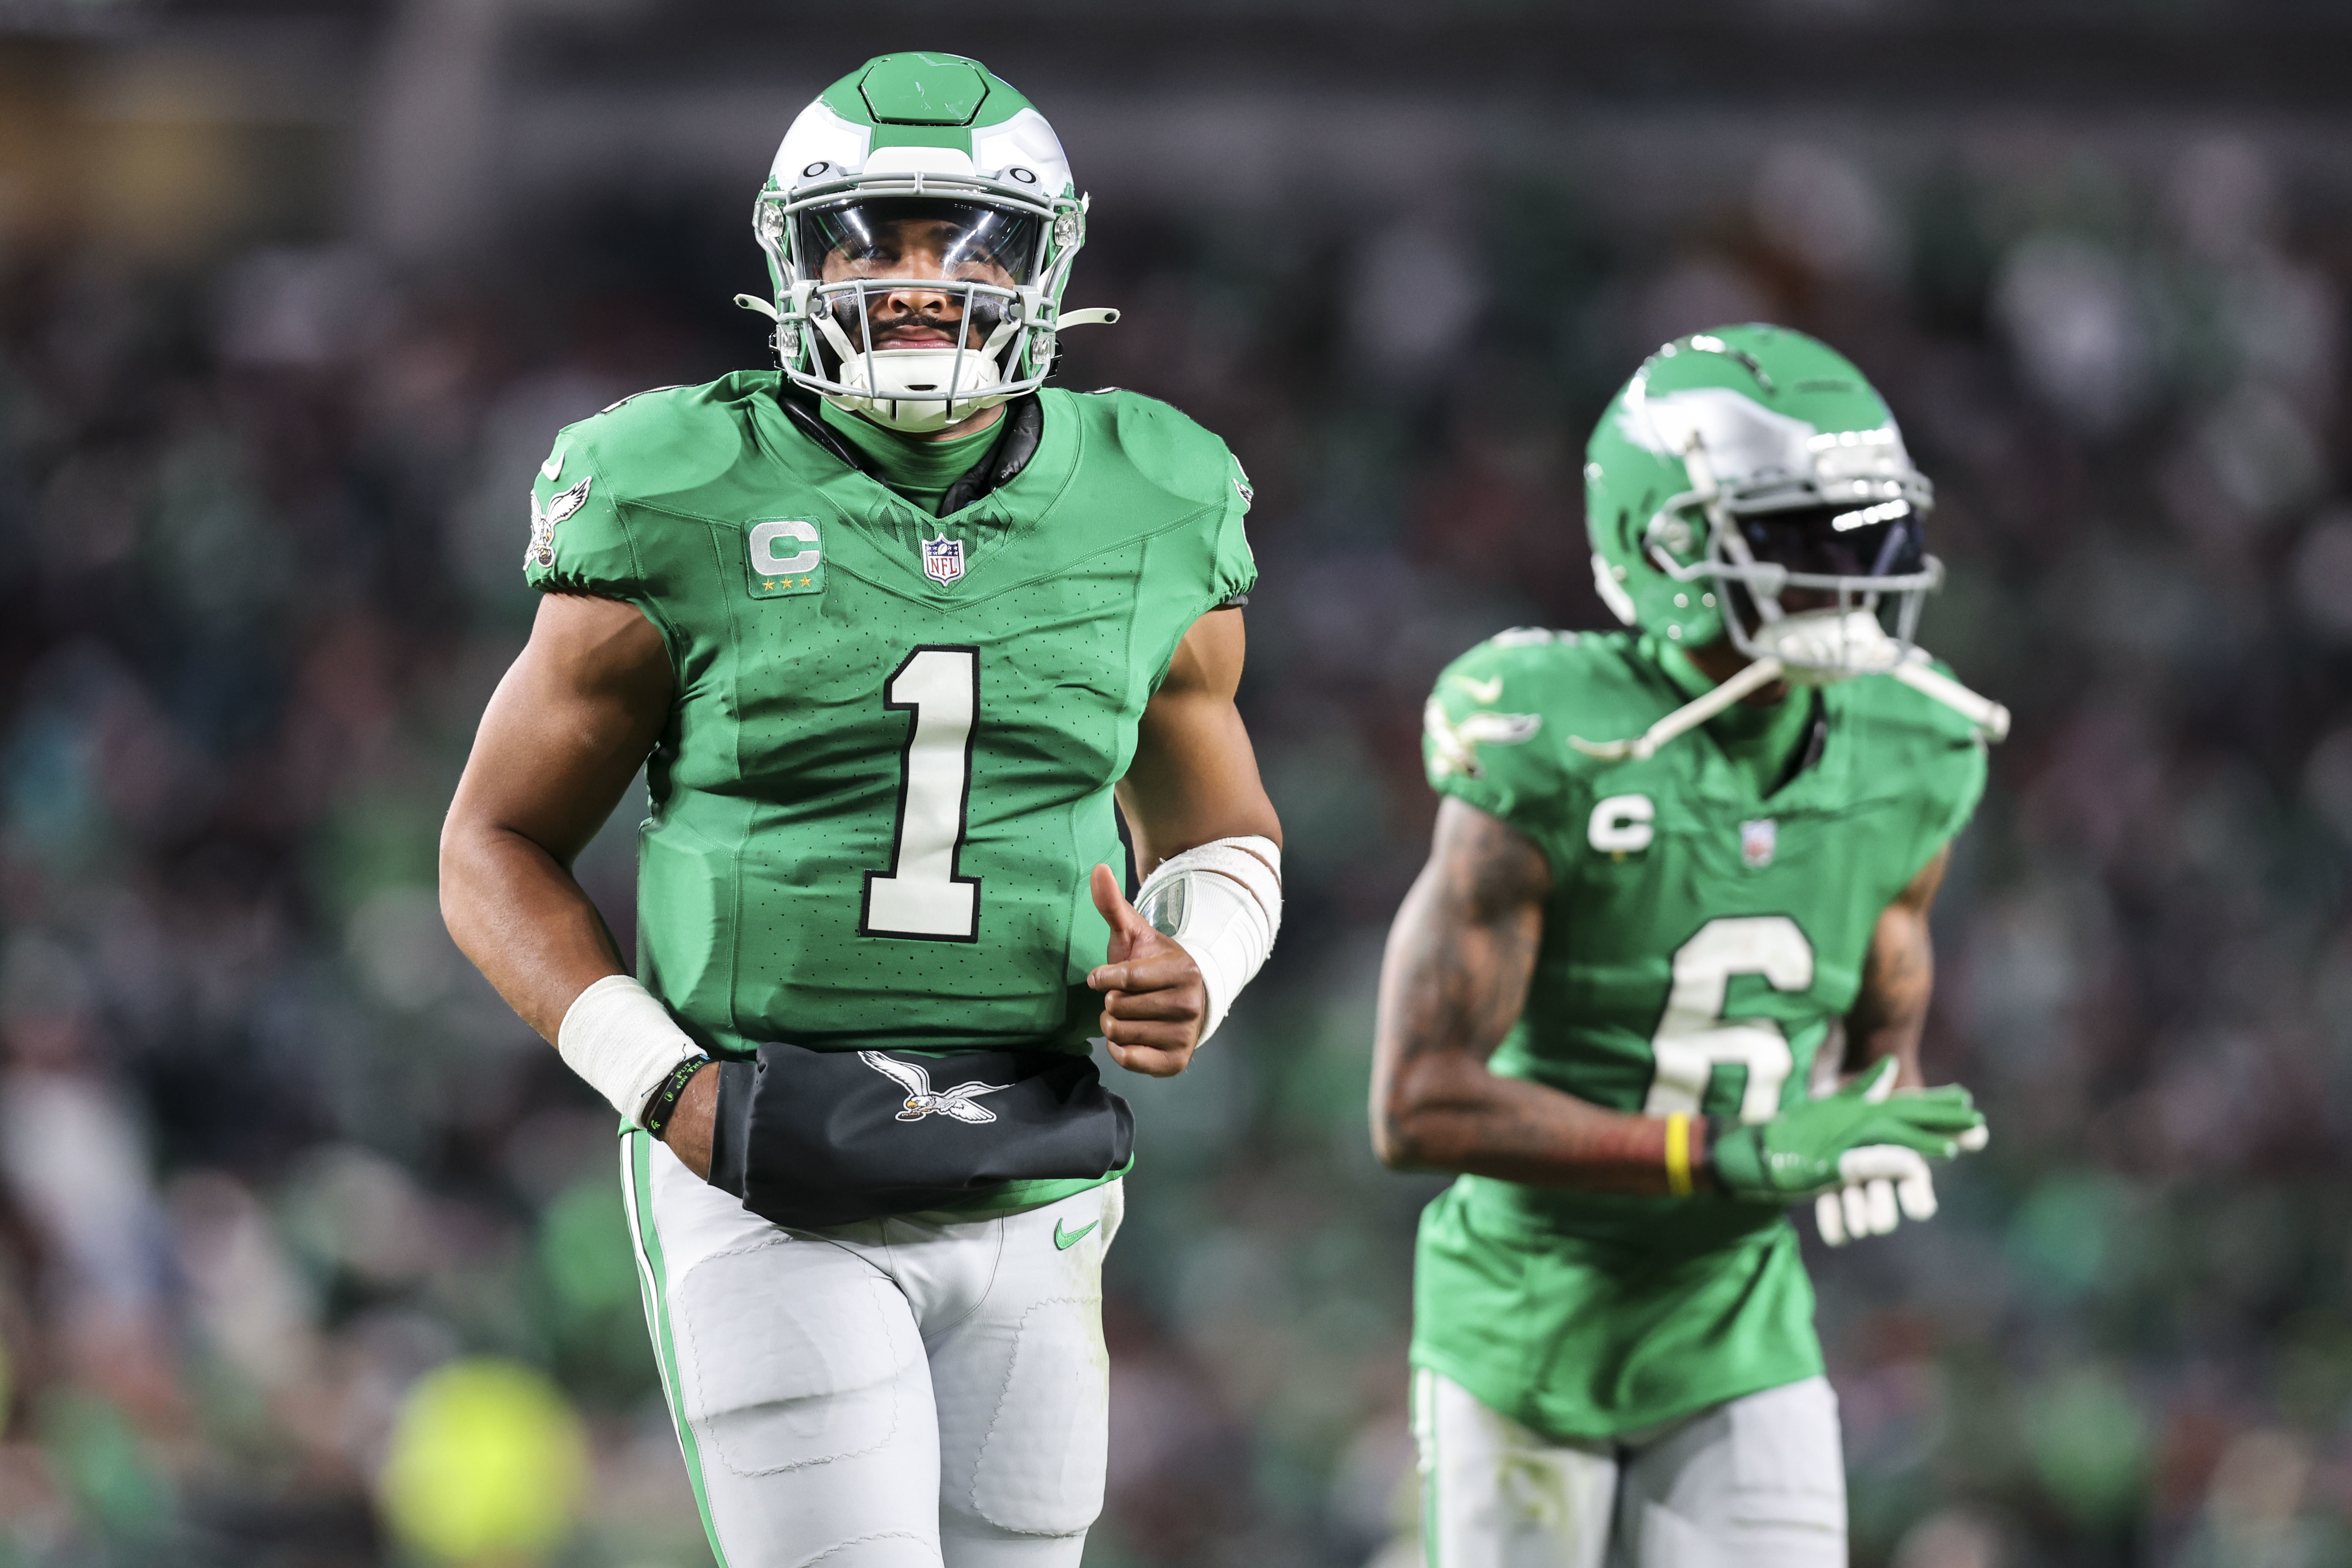 Eagles look to trademark 'kelly green' after bringing back retro uniforms